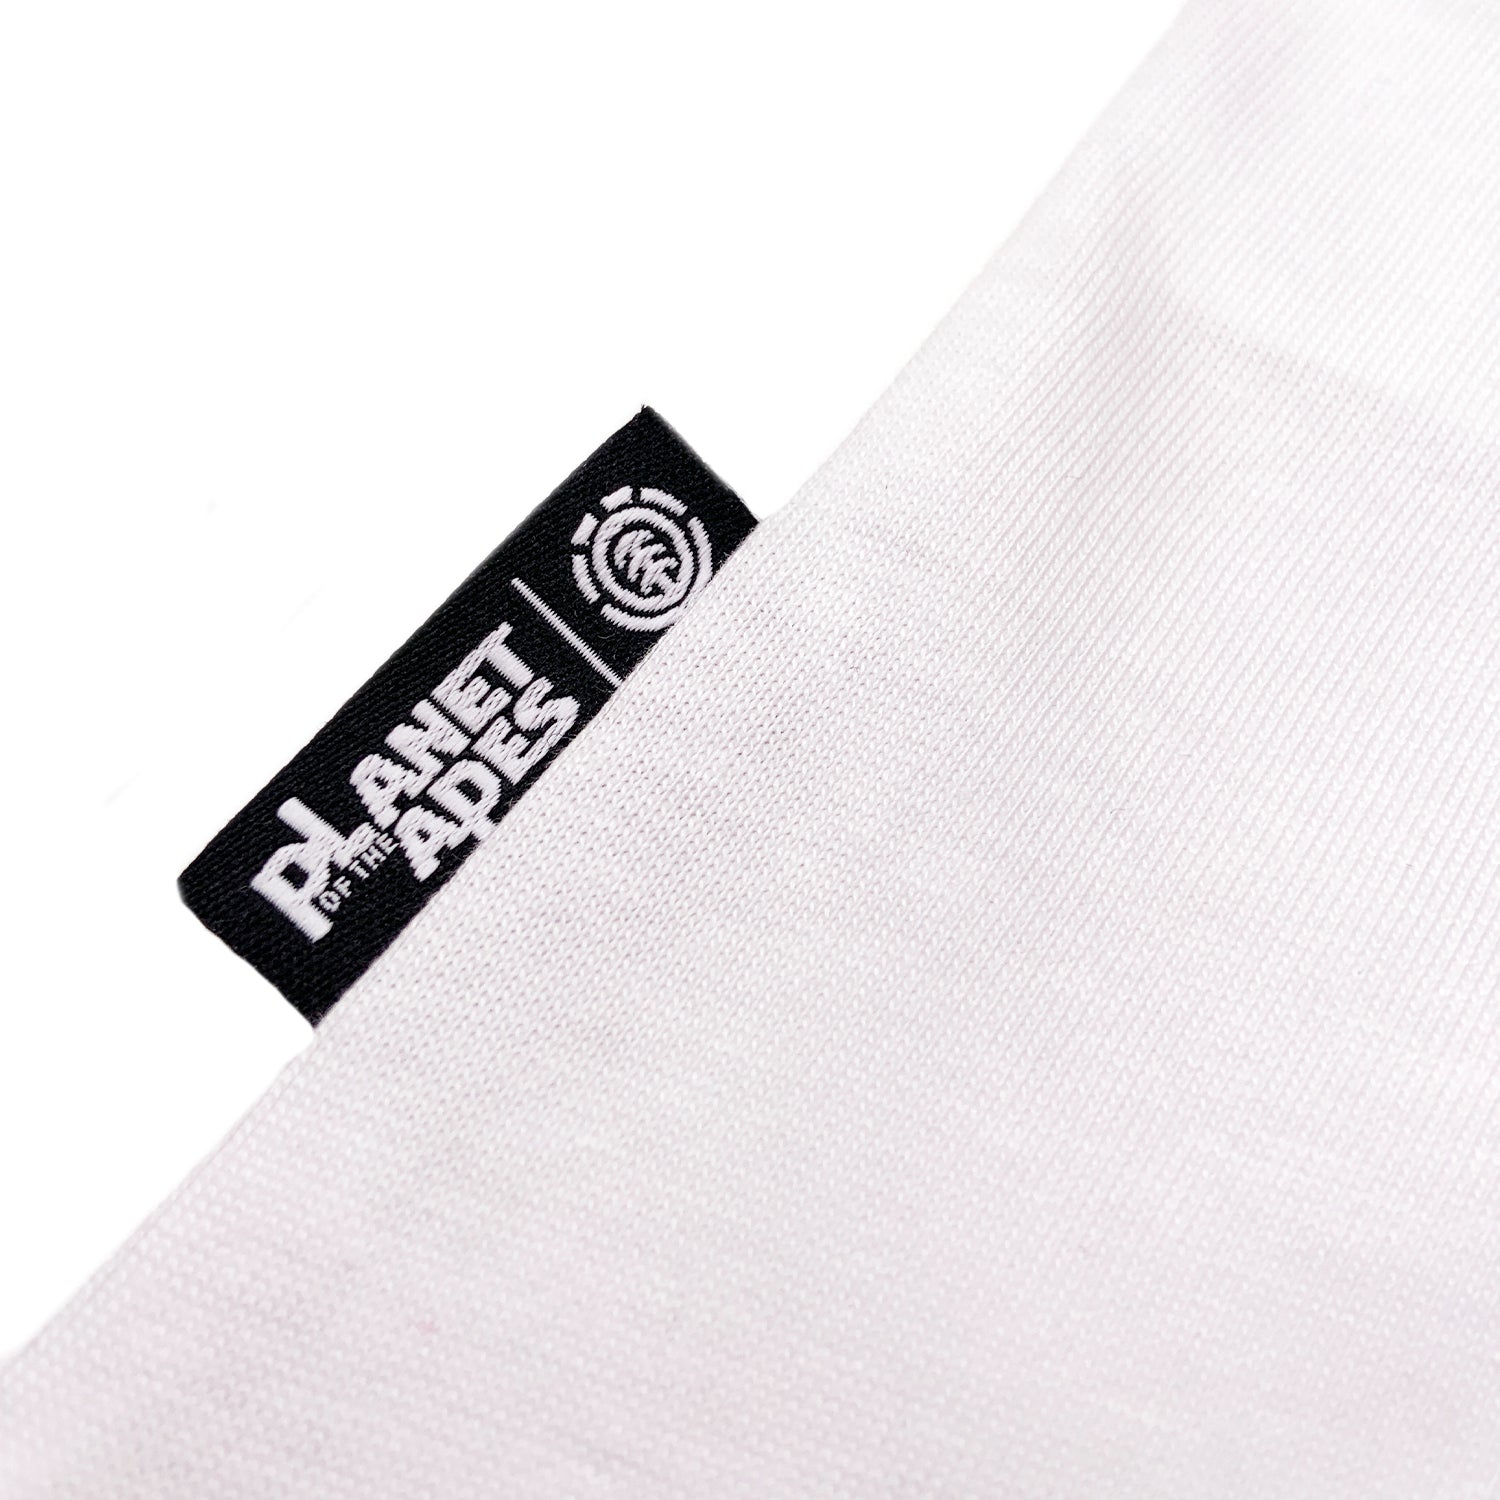 Element x Planet of the Apes - Dominion Long Sleeve T-shirt - Prime Delux Store